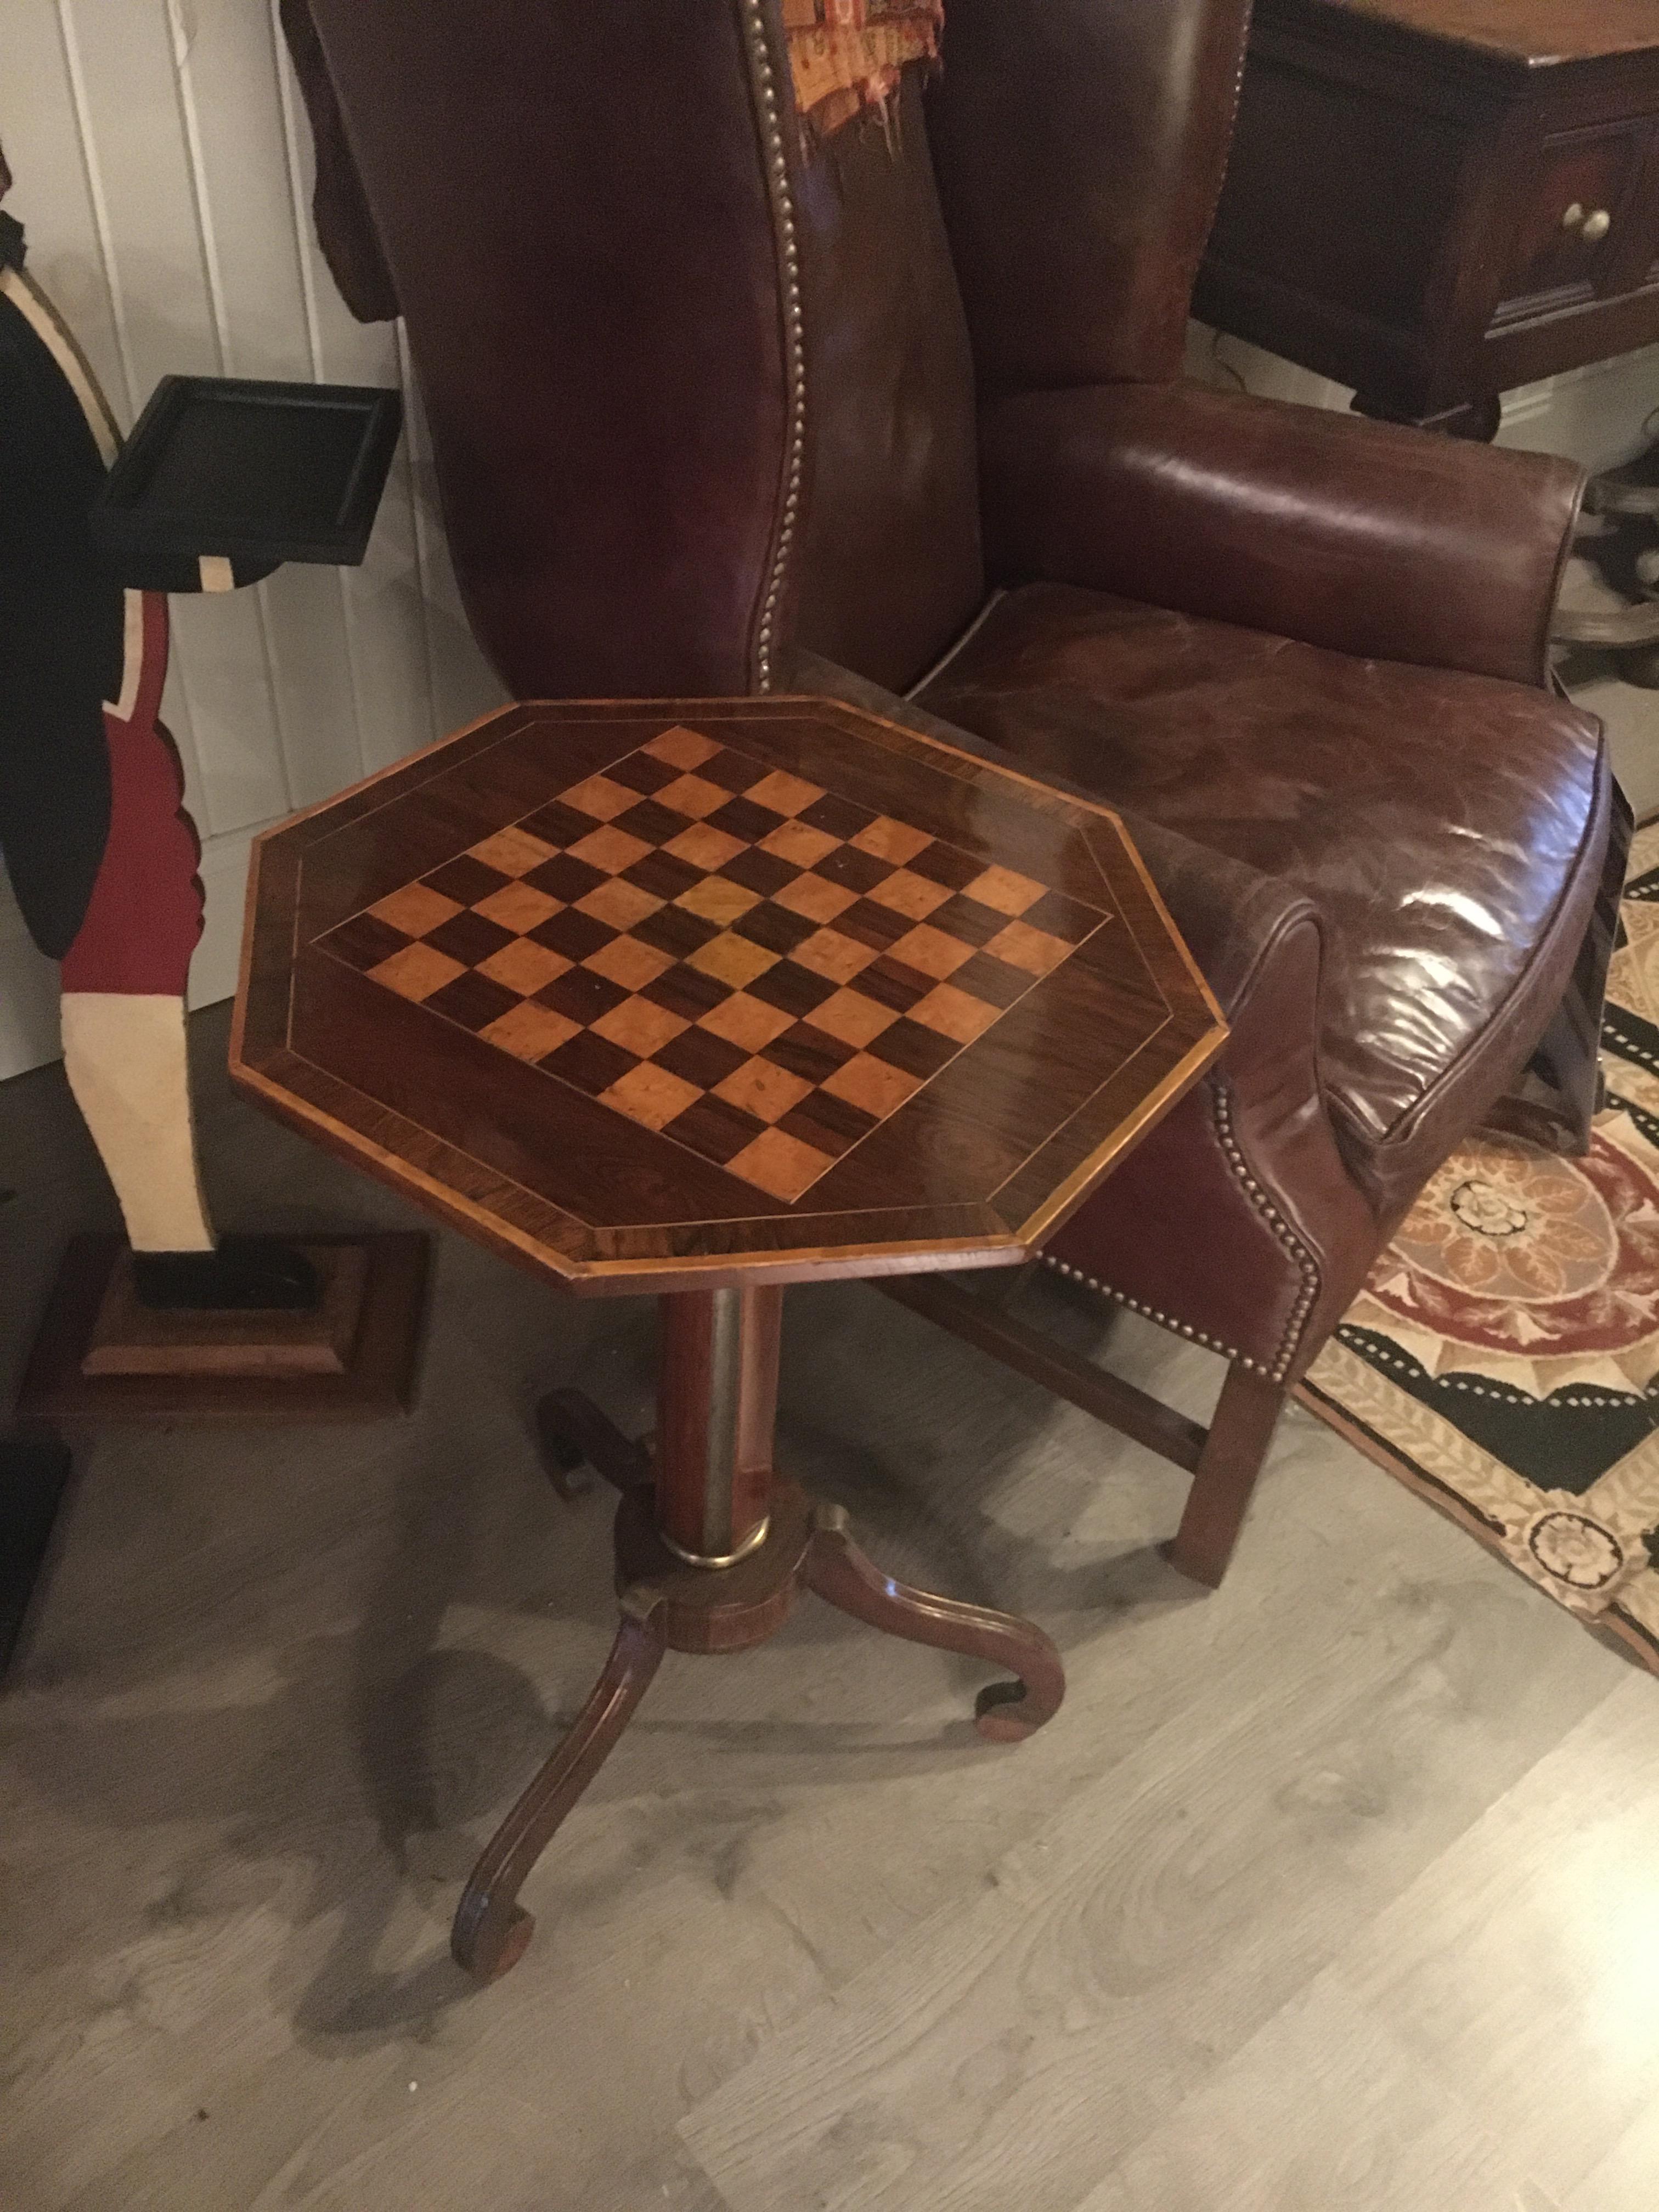 19th English Walnut Games Table, Top Flips For Both Chess And Cribbage/bsckgammo 5